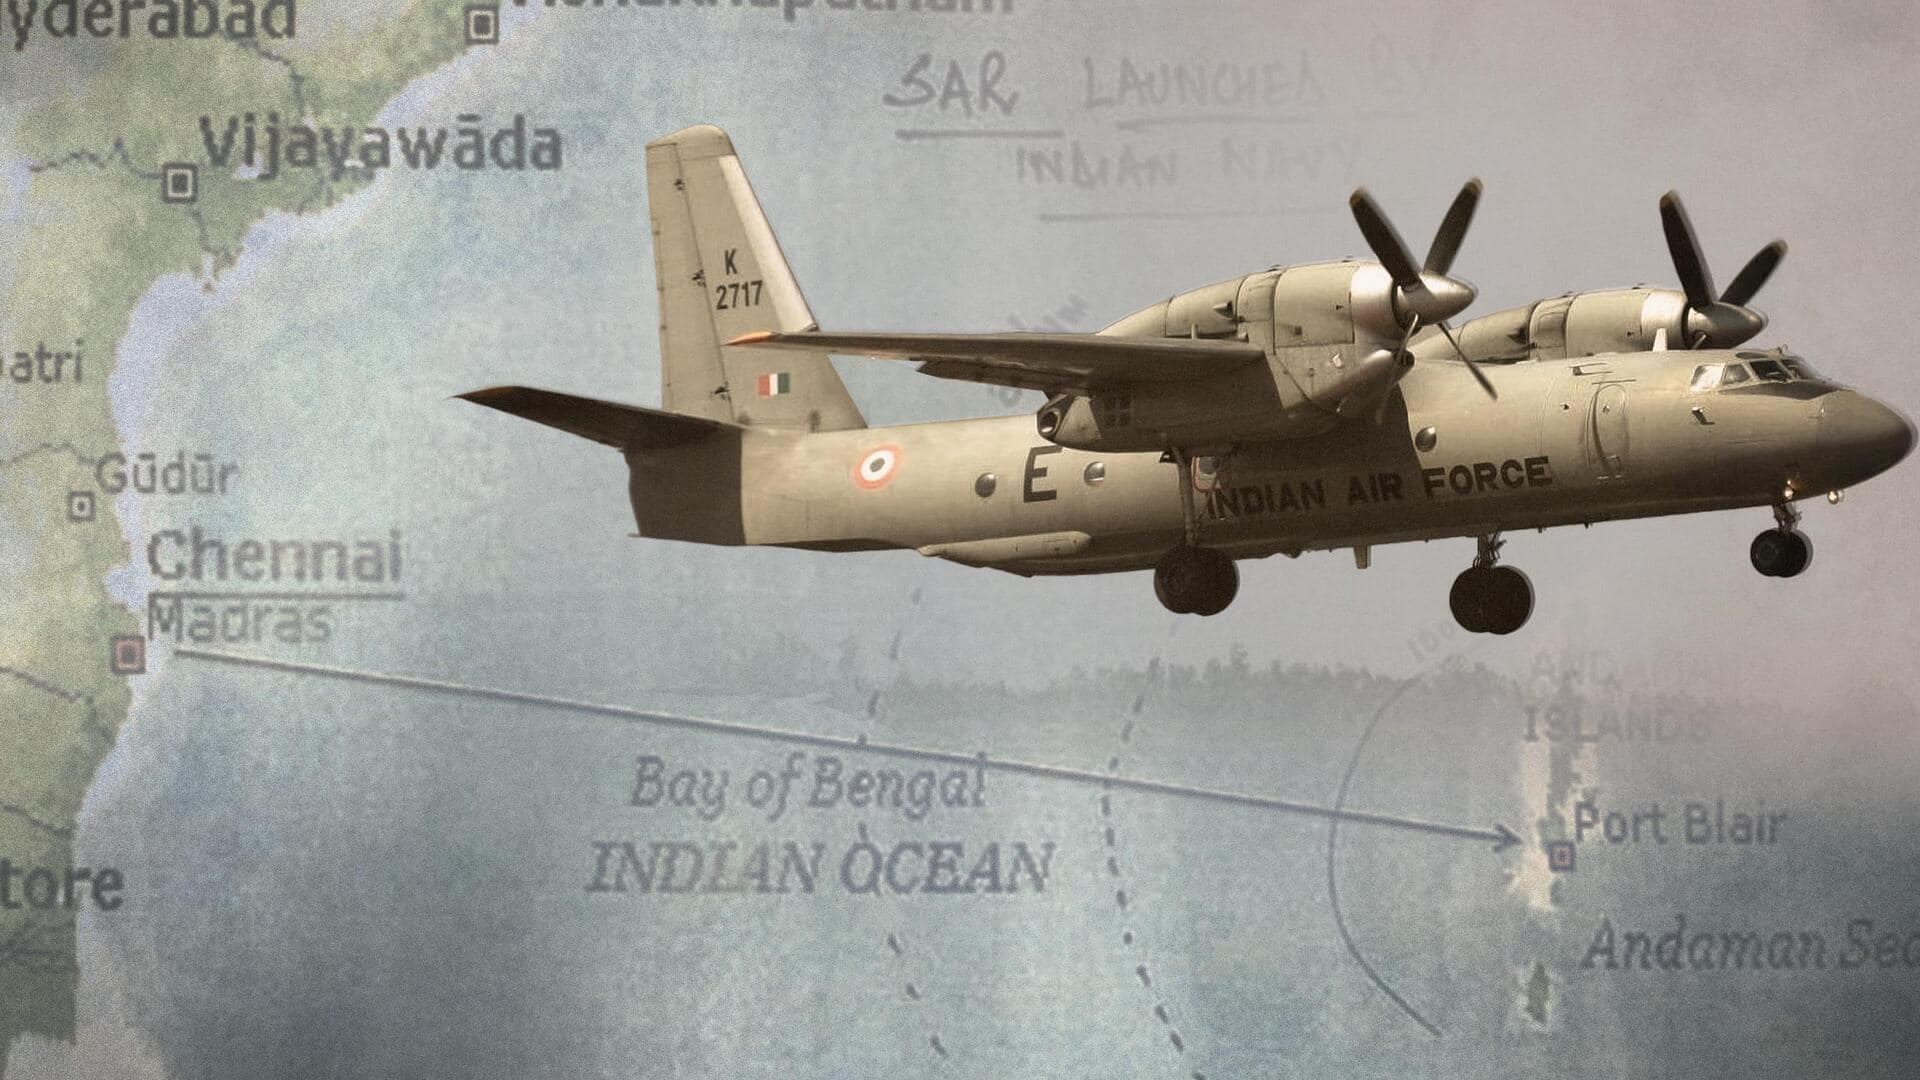 Mystery solved! Missing IAF plane's wreckage found after 8 years